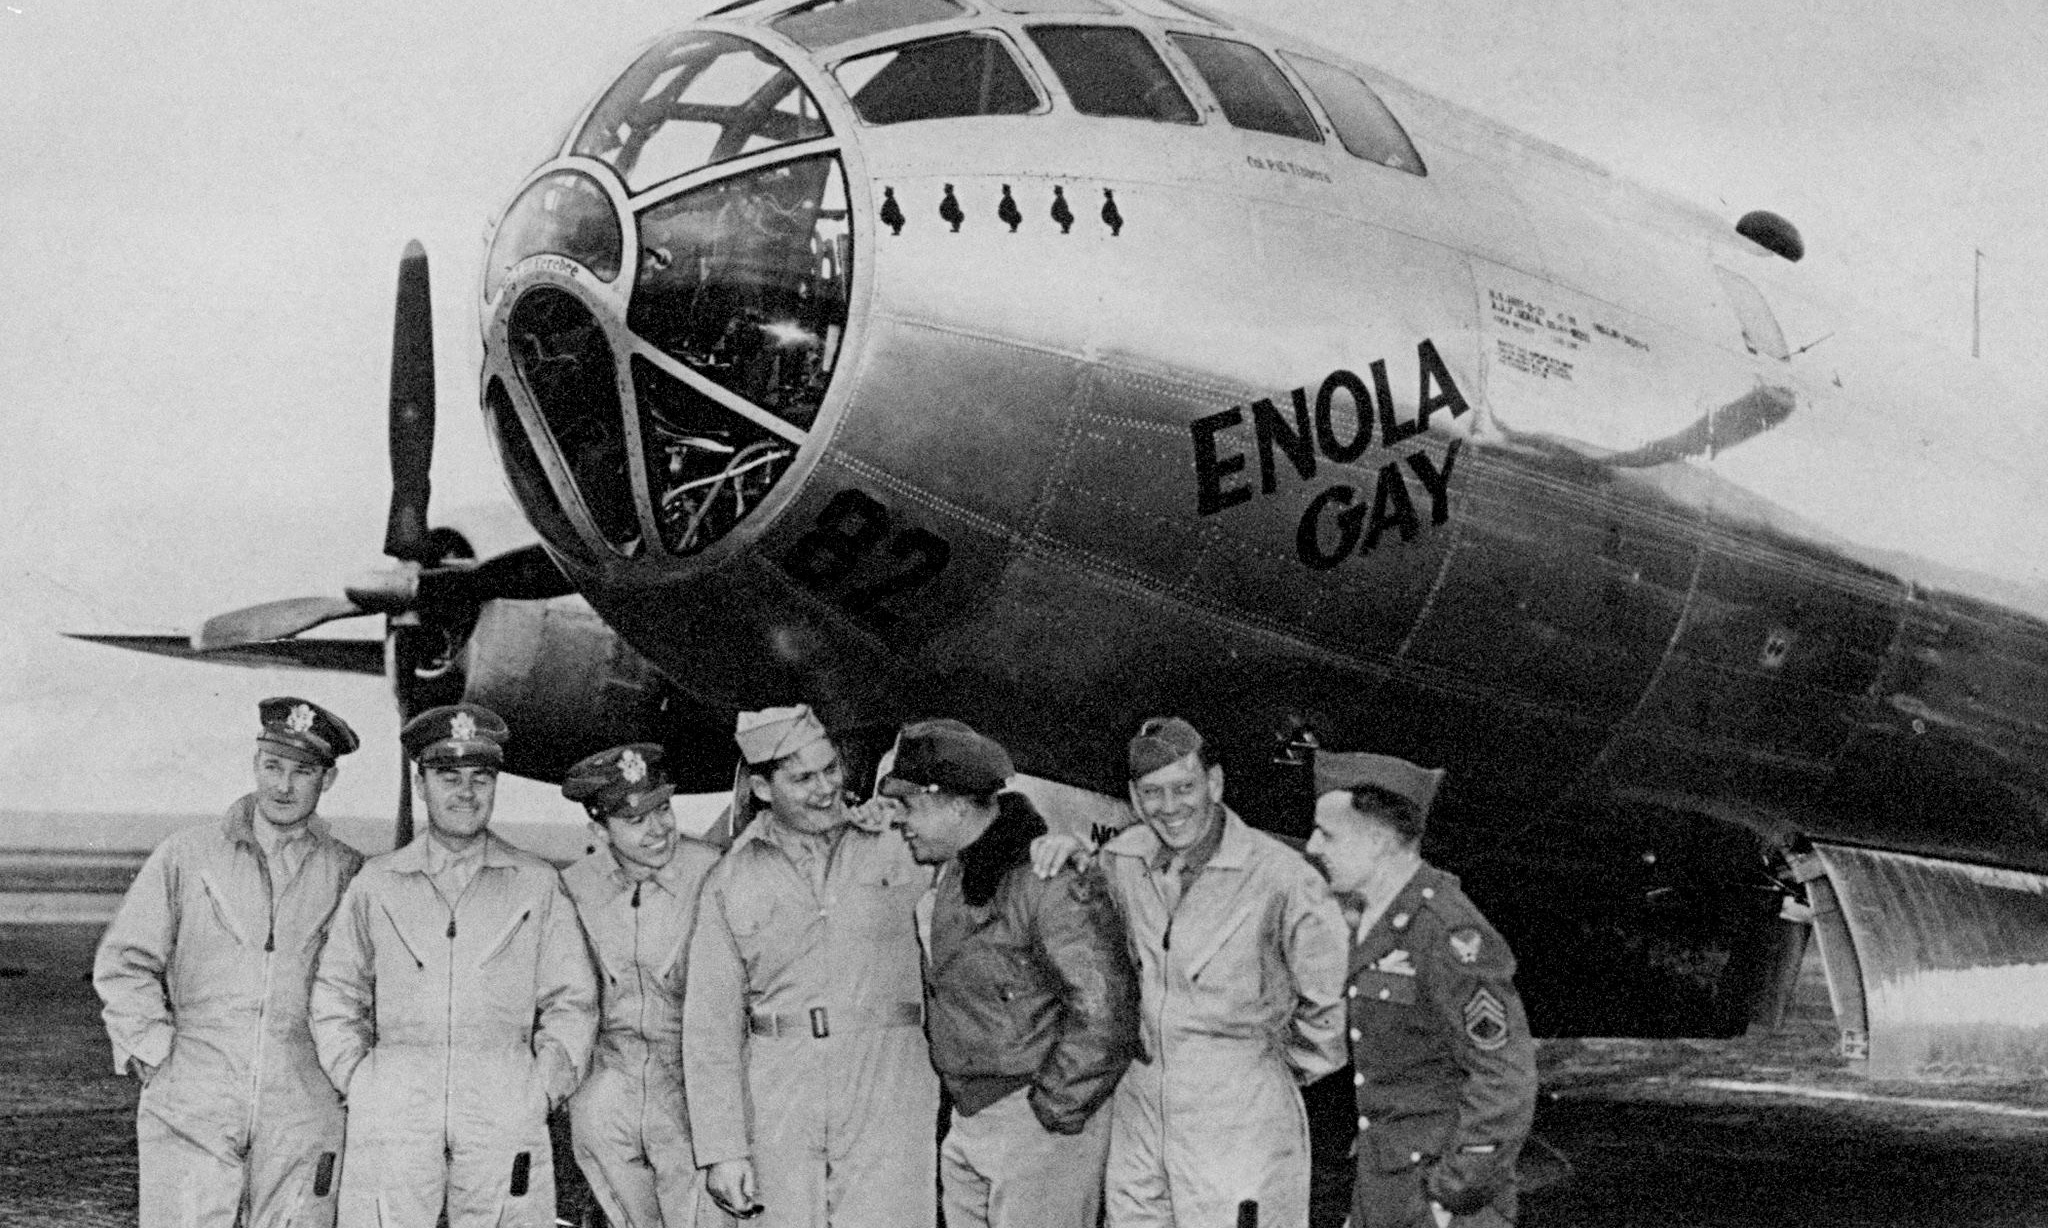 enola gay dropped which bomb